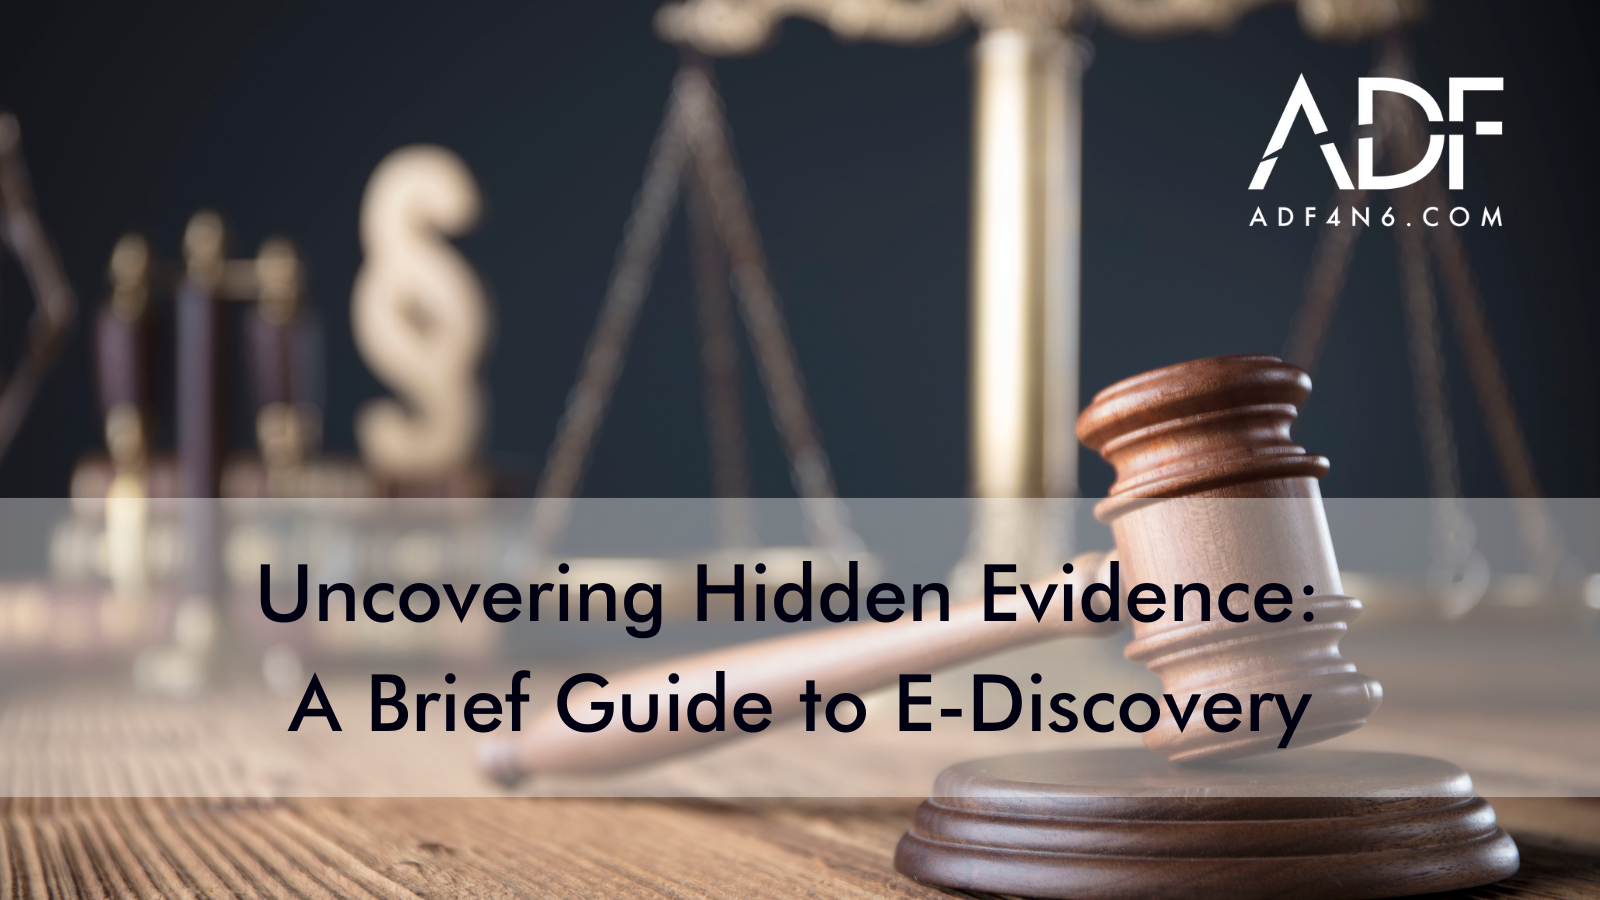 Uncovering Hidden Evidence: A Brief Guide to E-Discovery